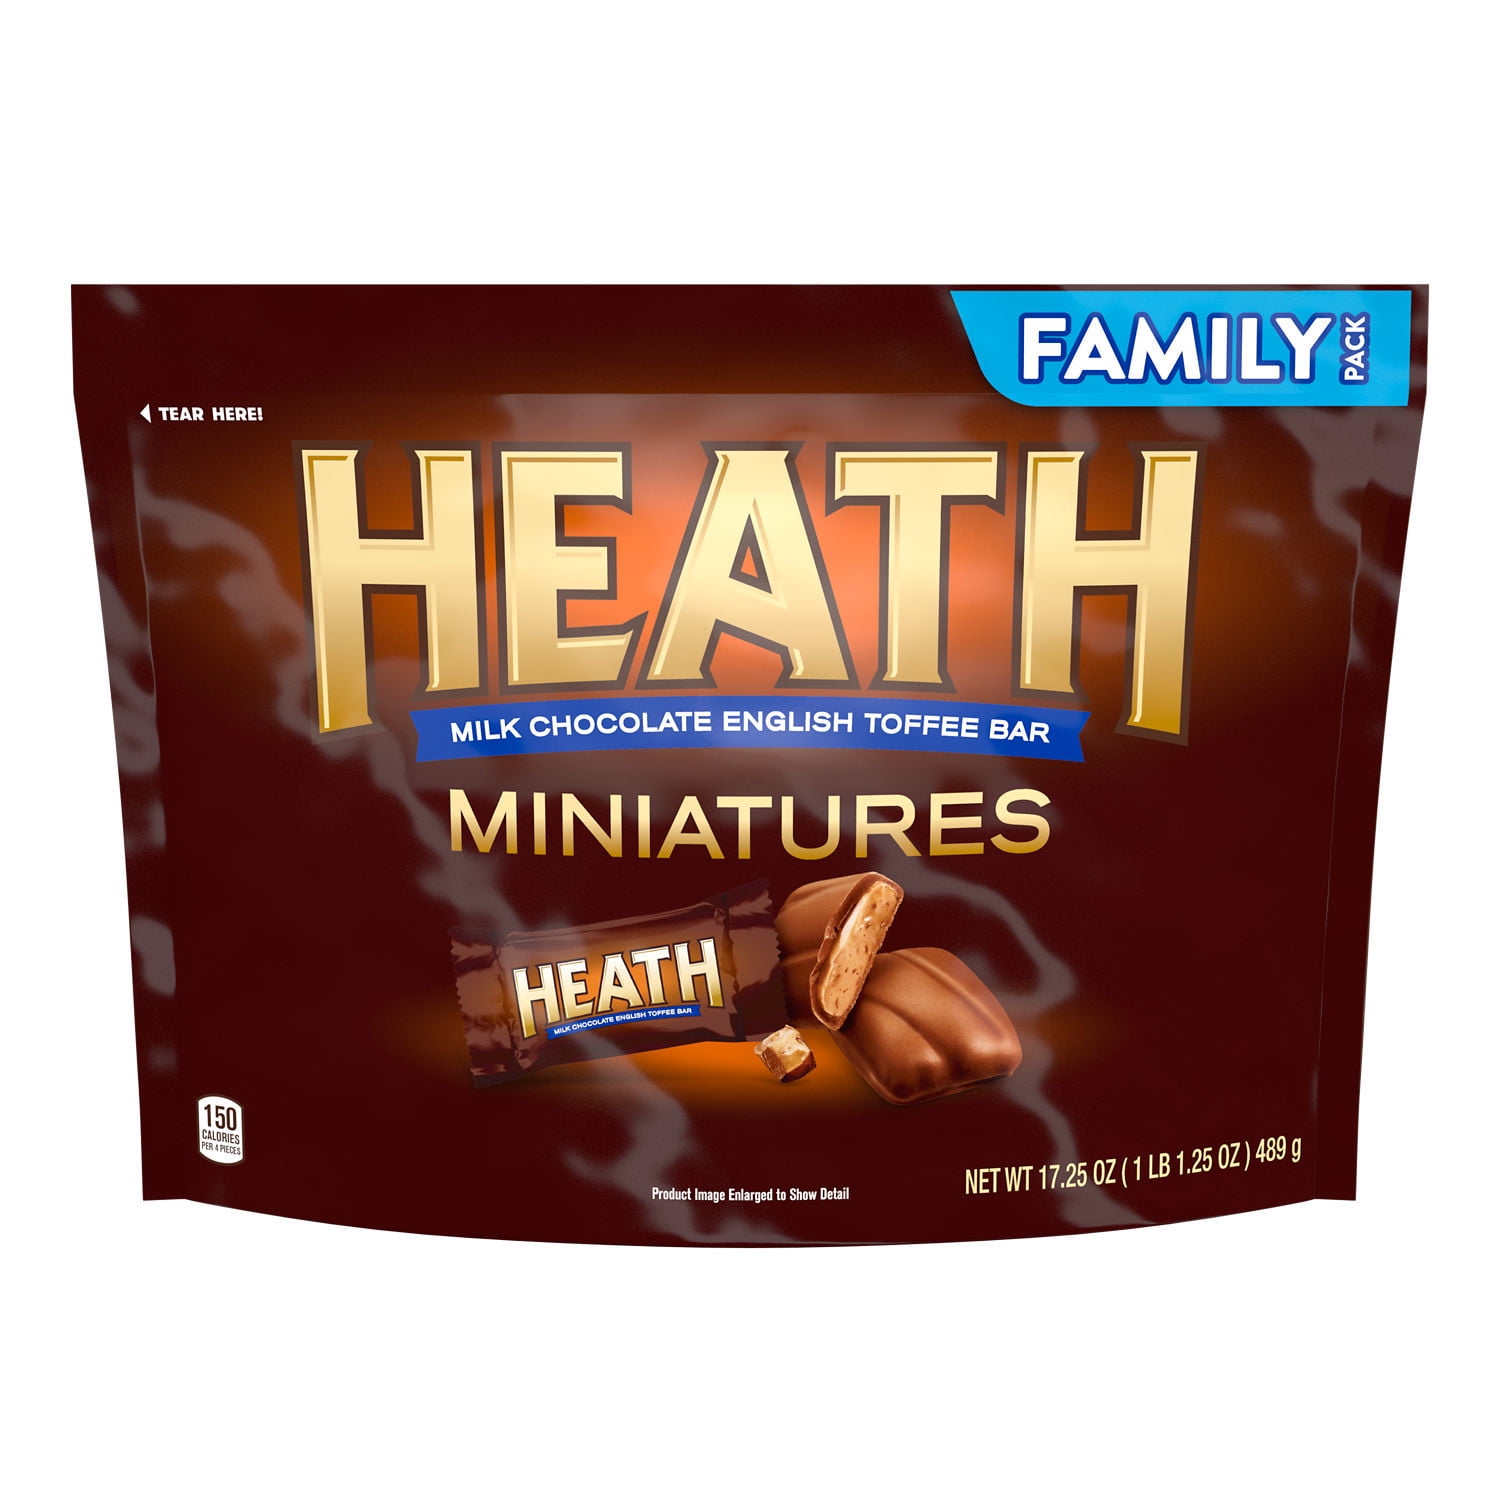 HEATH Miniatures Milk Chocolate English Toffee Bars, Individually Wrapped, Gluten Free Candy Family Pack, 17.25 oz